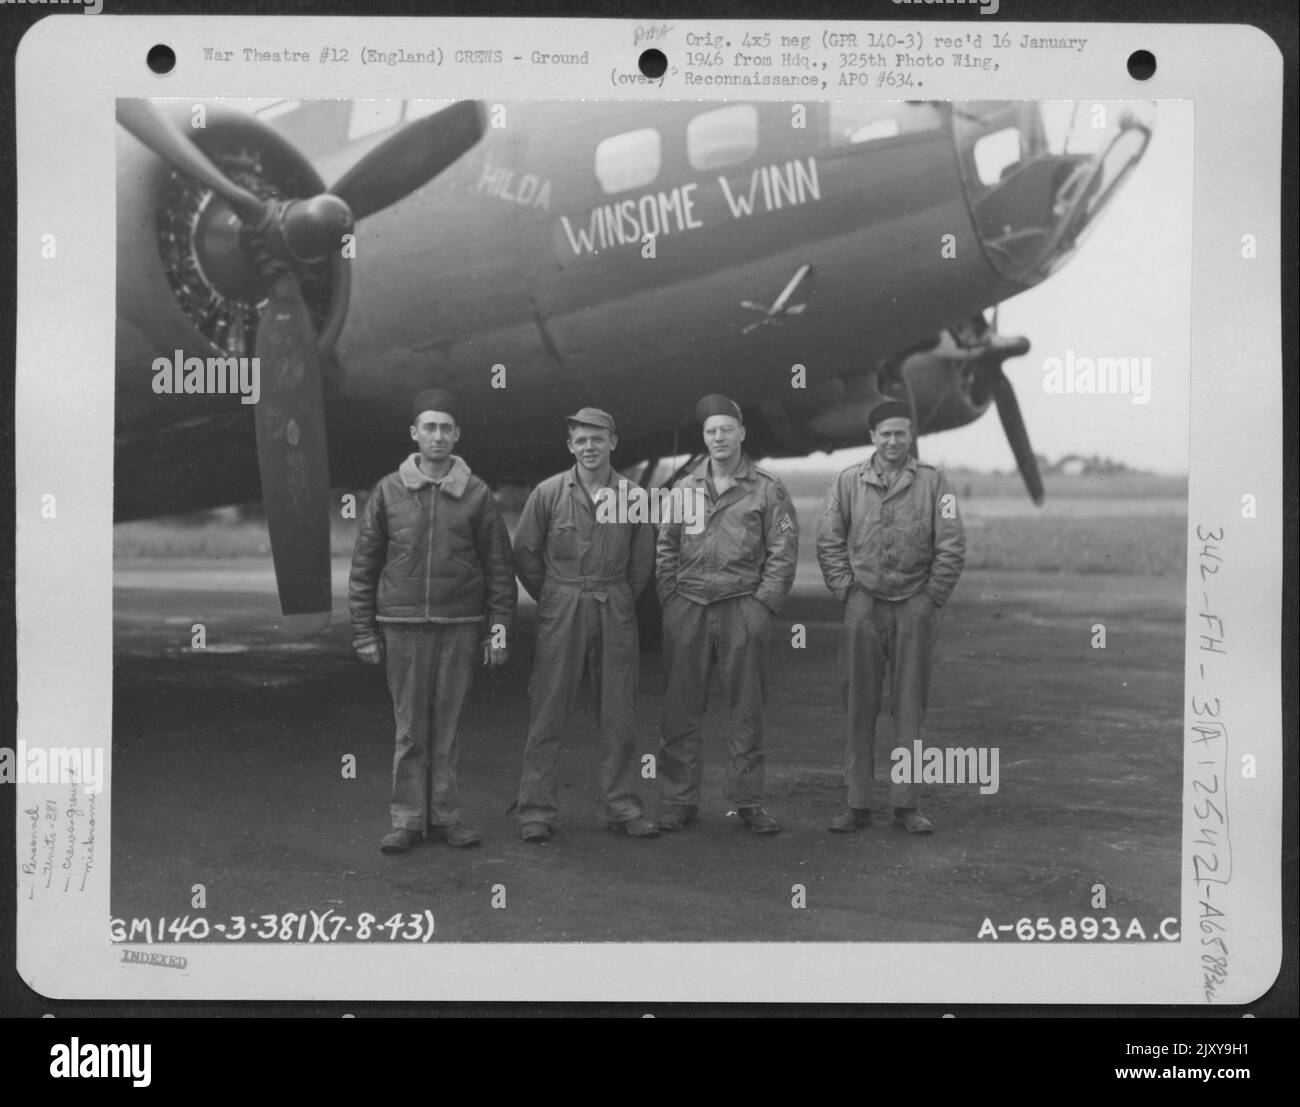 M/Sgt. Corey And Crew Of The 381St Bomb Group, Beside The Boeing B-17 'Flying Fortress' 'Winsome Winn' At 8Th Air Force Base 167, England. 7 August 1943. Stock Photo